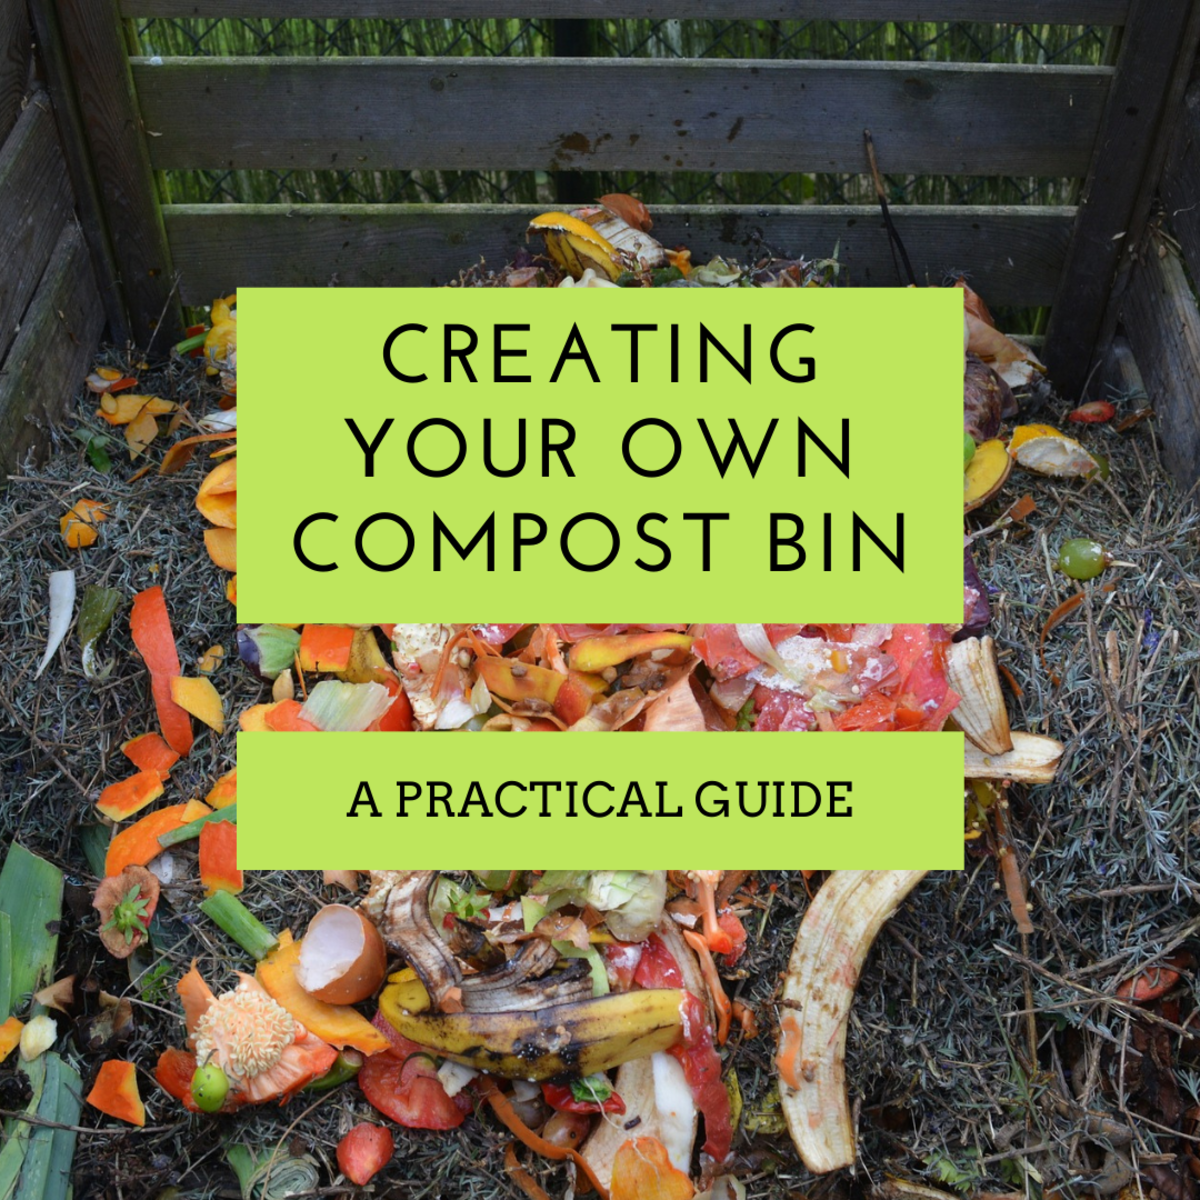 This article will show you how to put together your own compost bin and manage the health of your compost.